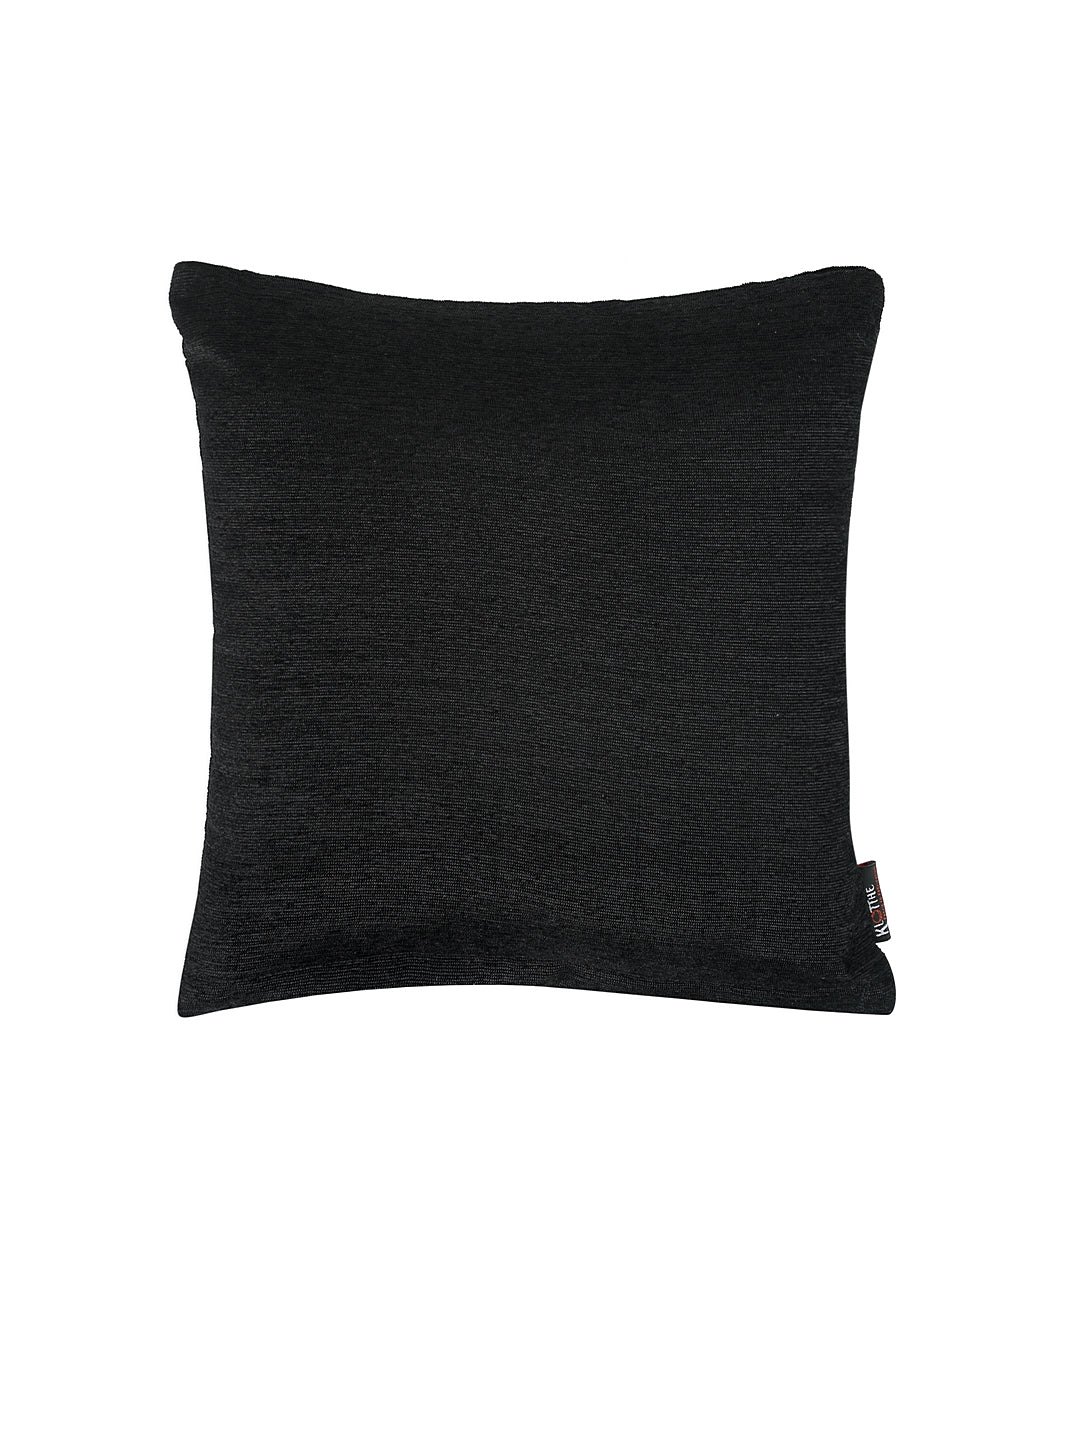 KLOTTHE Set of Five Black Poly Cotton Cushion Covers With Microfibre Fillers (40X40 cm)